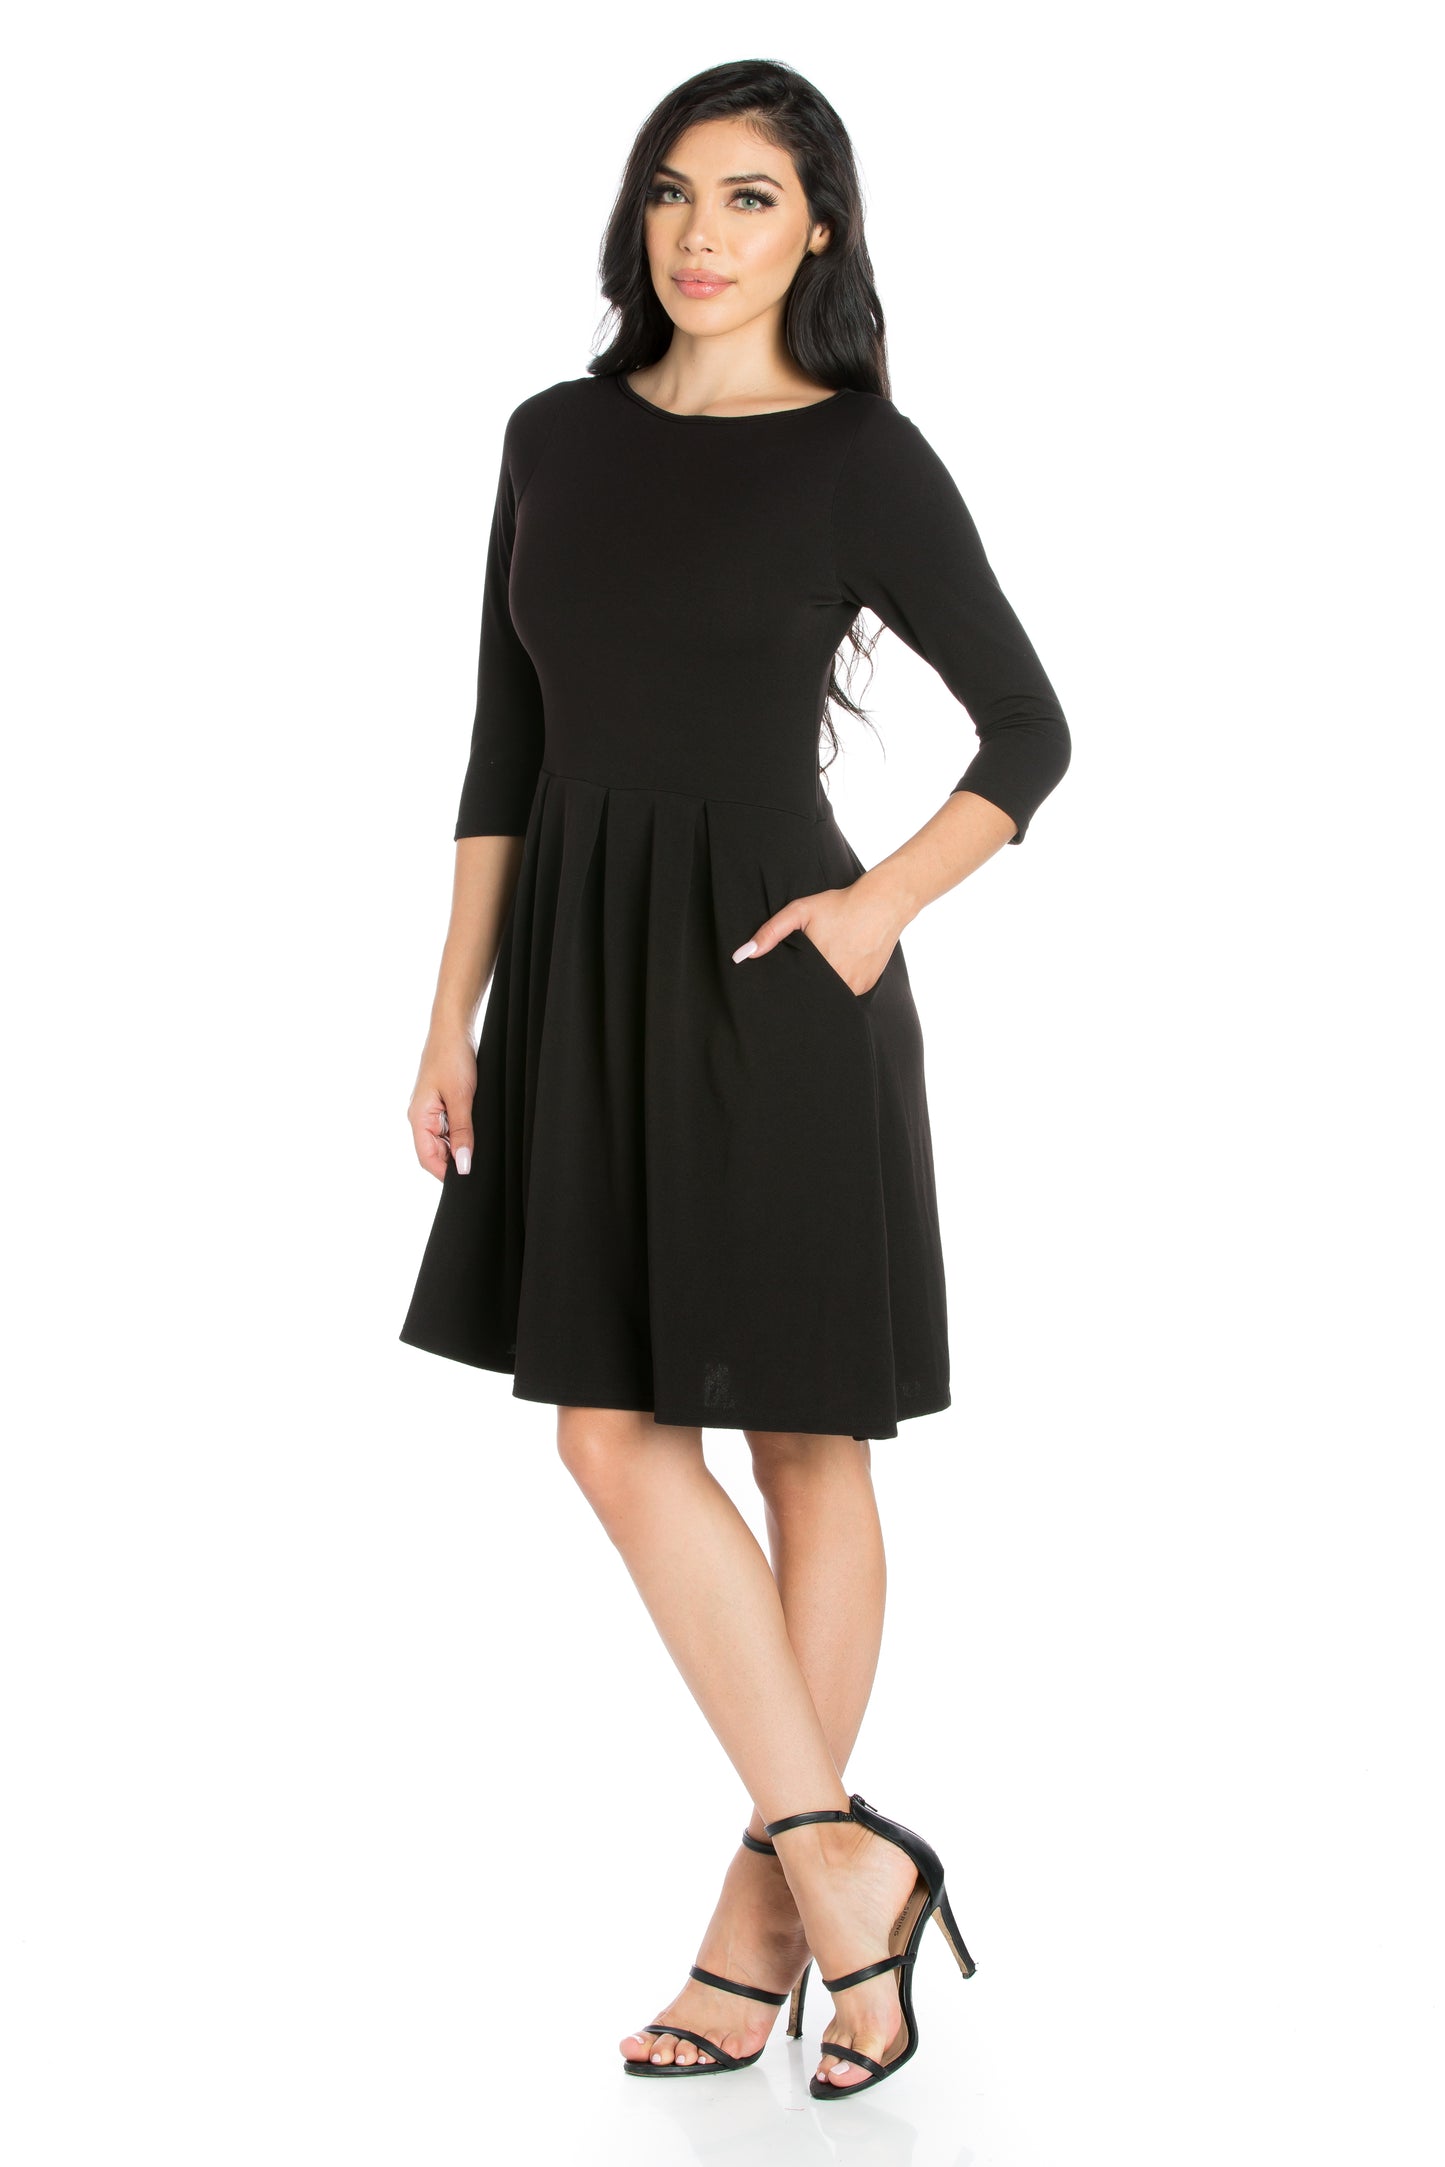 Womens Missy Perfect Fit and Flare Pocket Dress